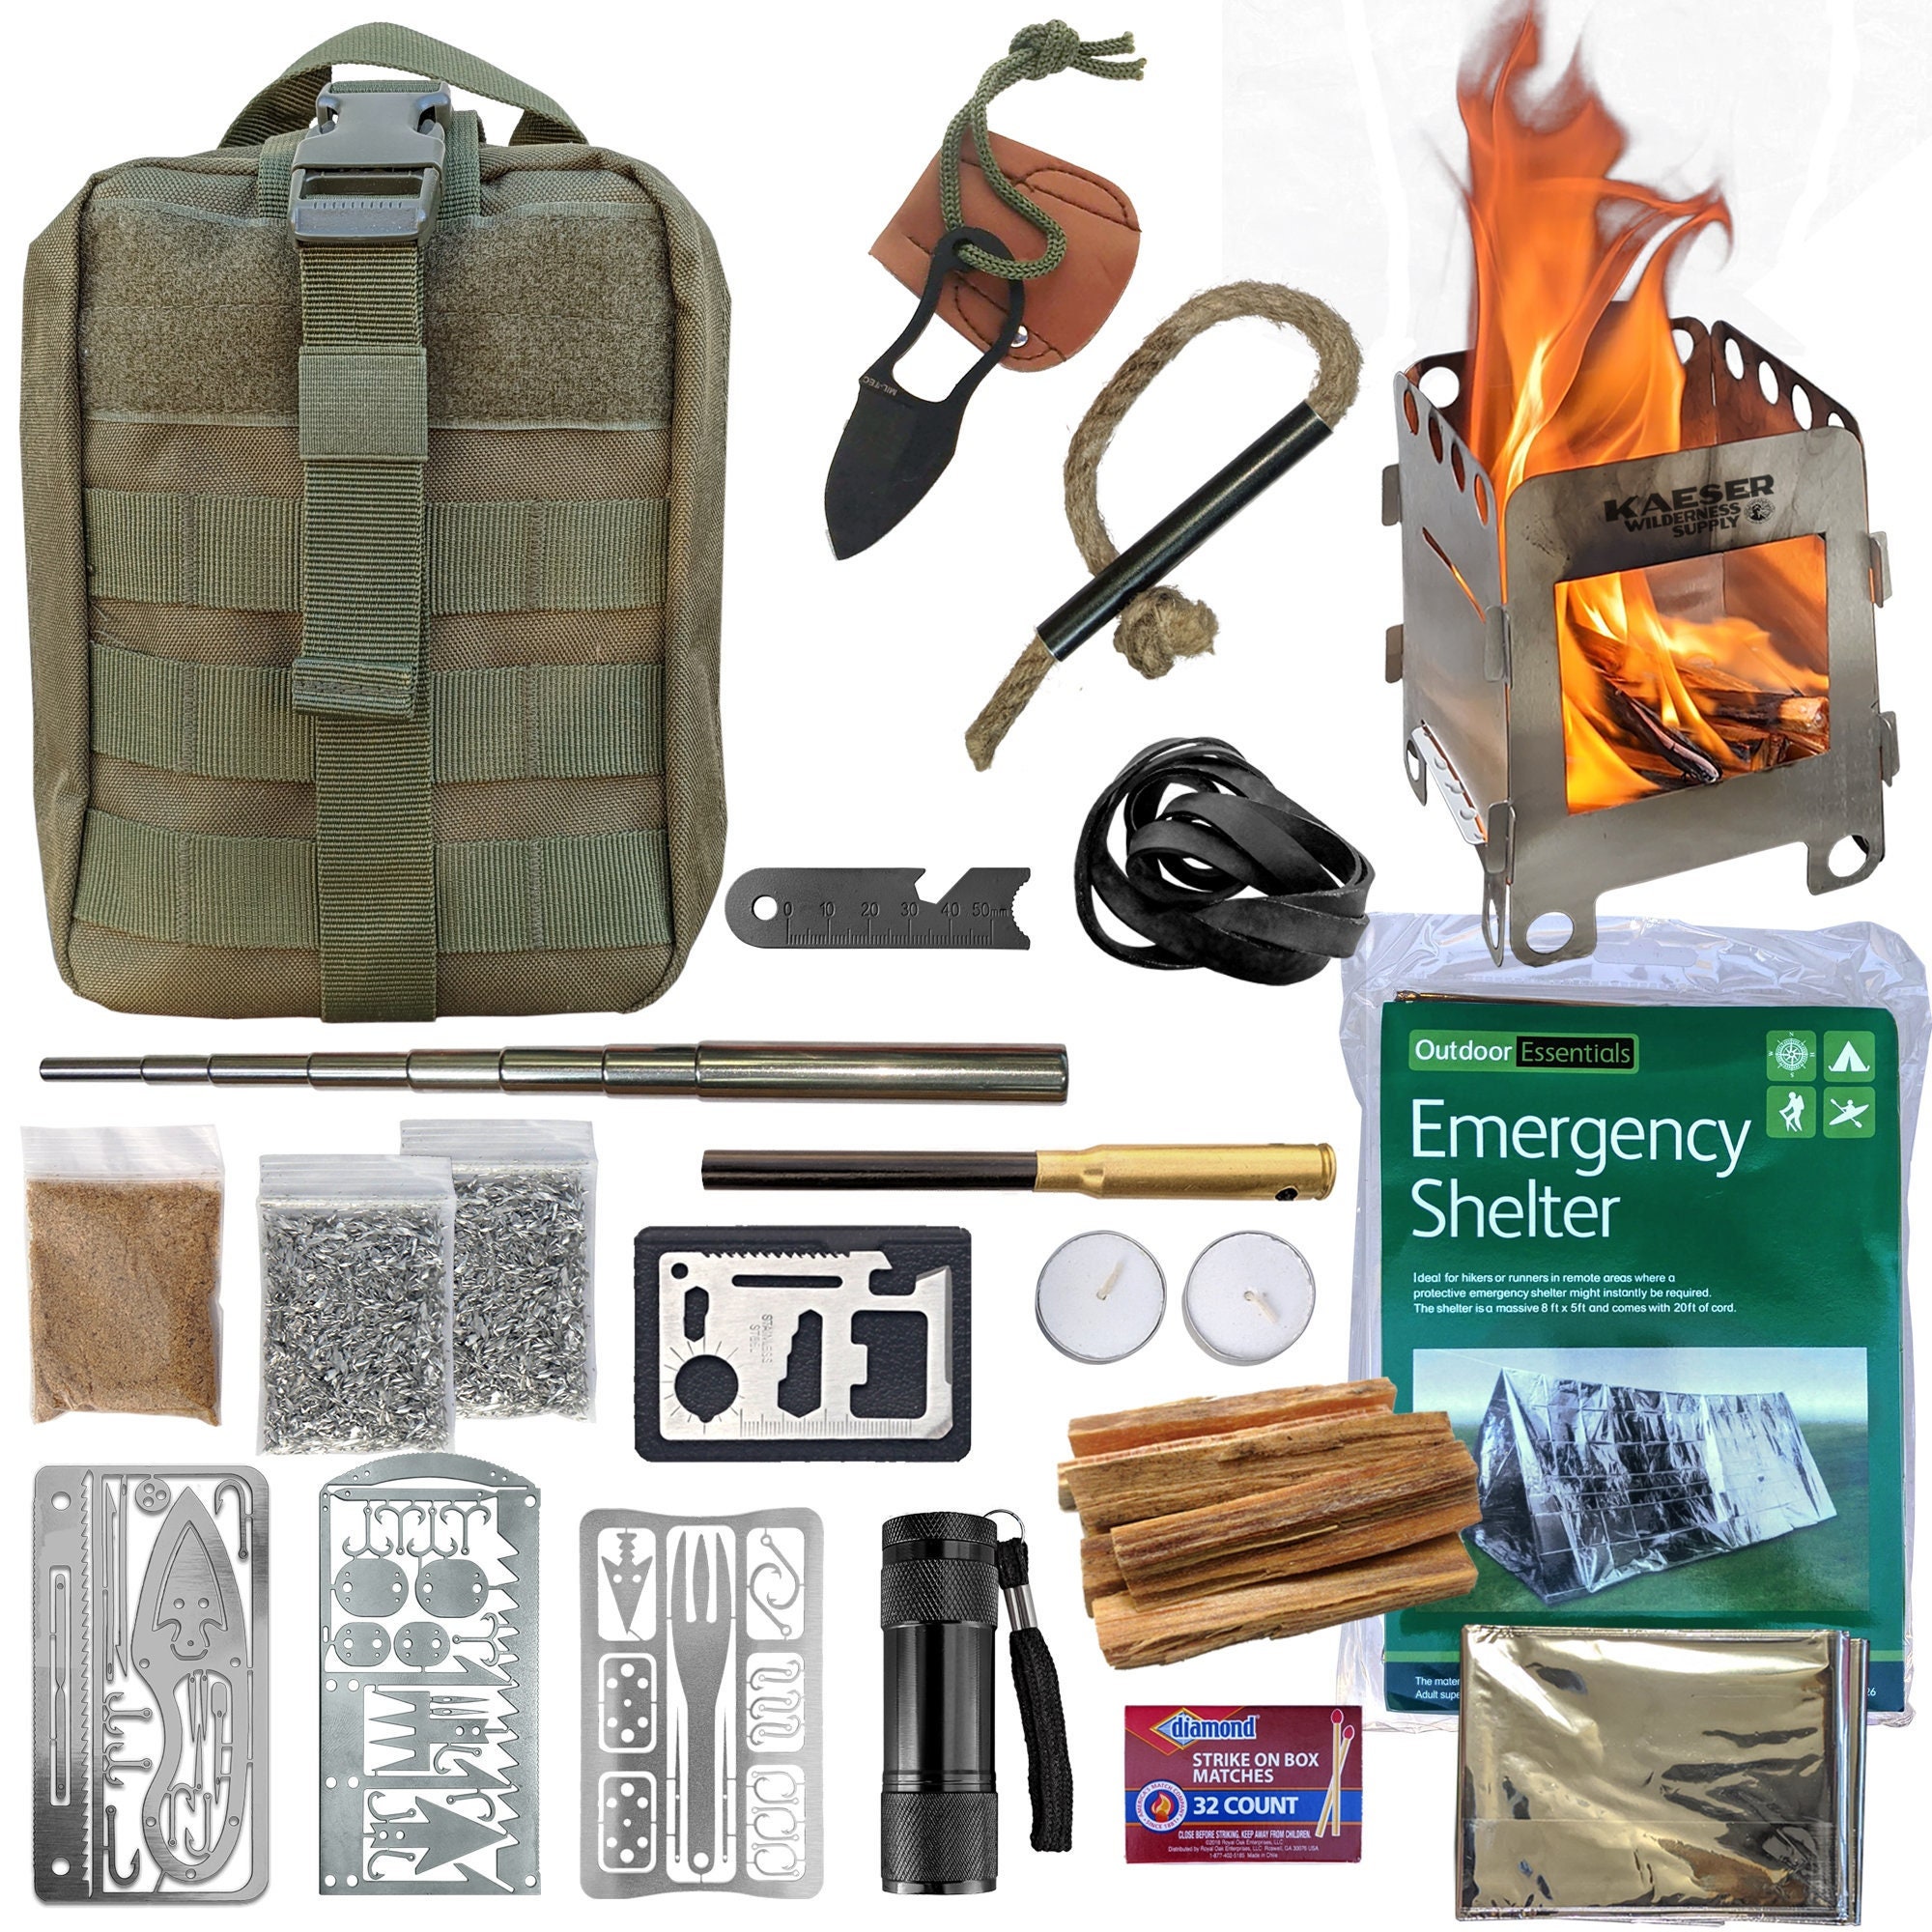 Survival Pack Ready to Go Everything You Need Fatwood Stove Ferro